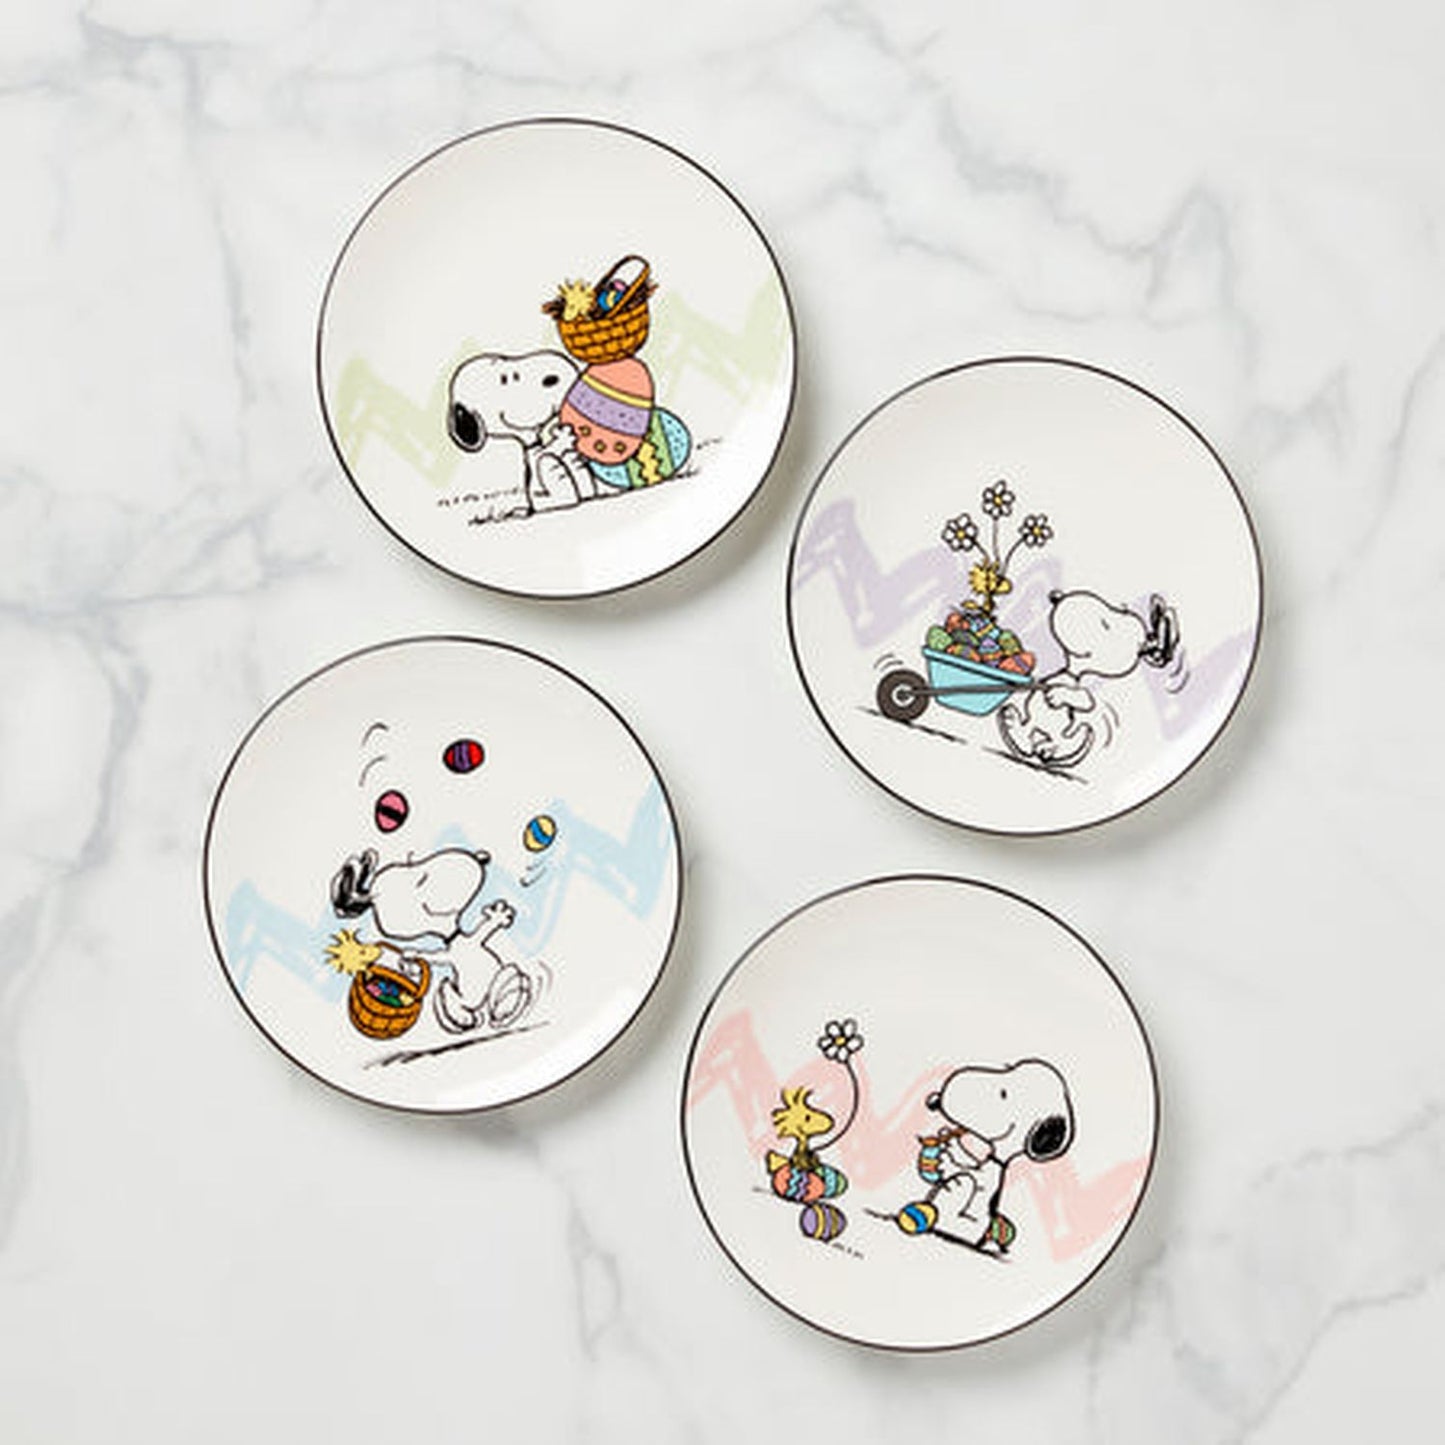 Lenox Snoopy 8" Easter Accent Plates, Set of 4 Assorted, Ivory, Porcelain